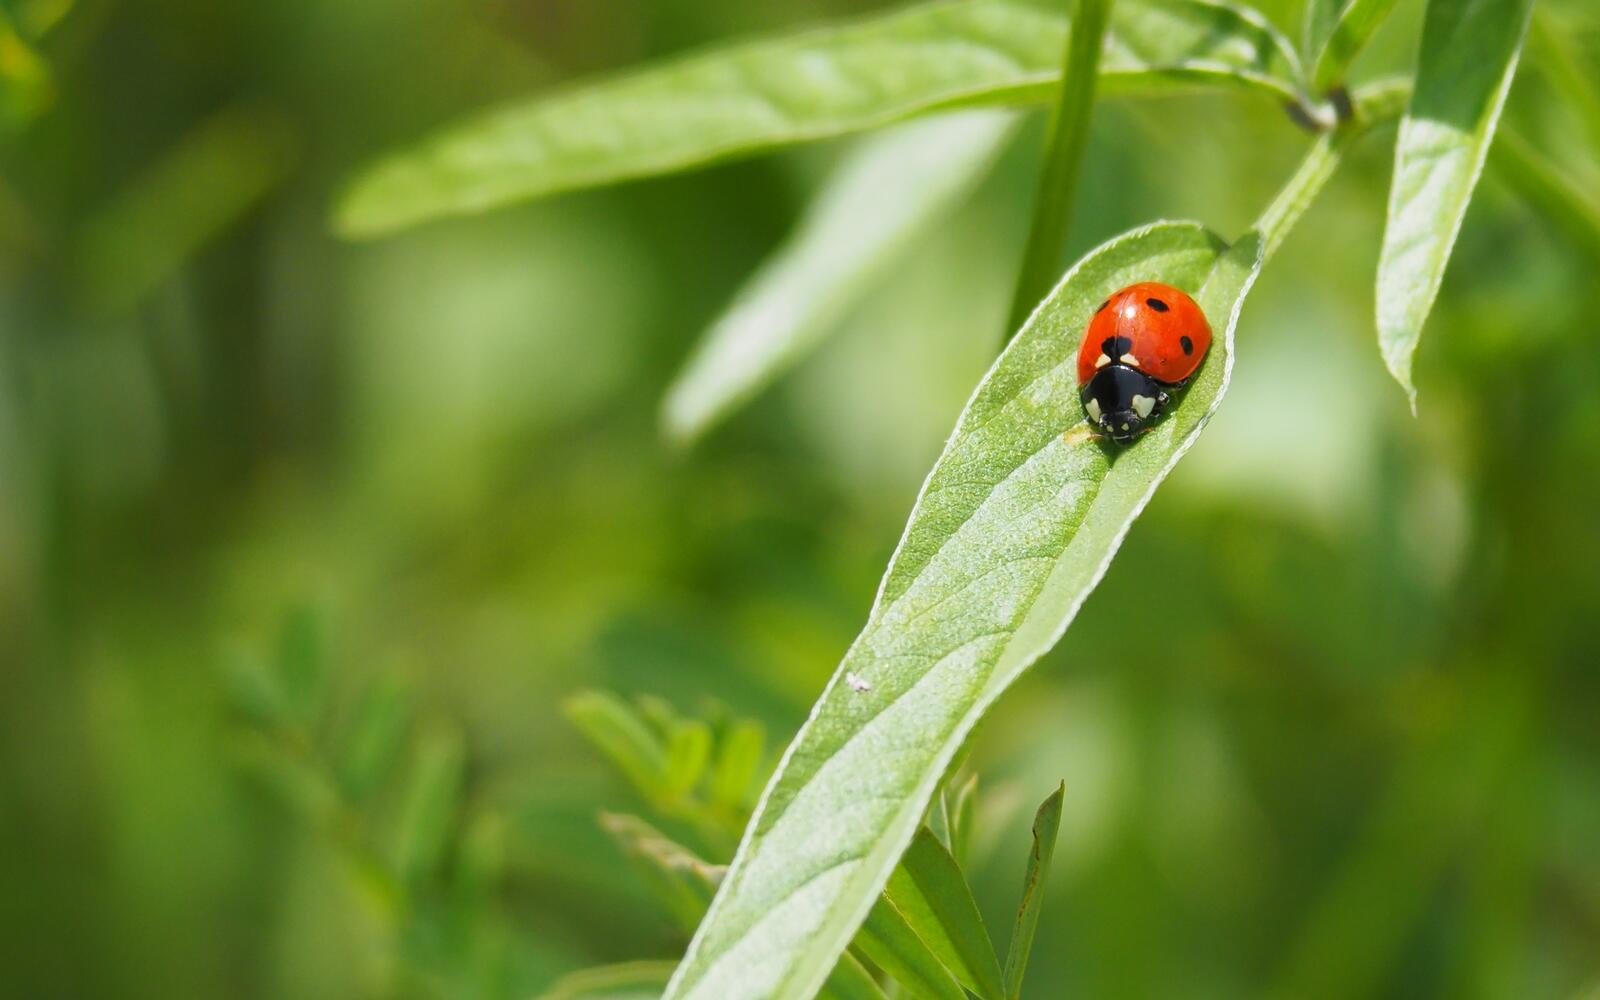 Wallpapers the plant ladybug insect on the desktop